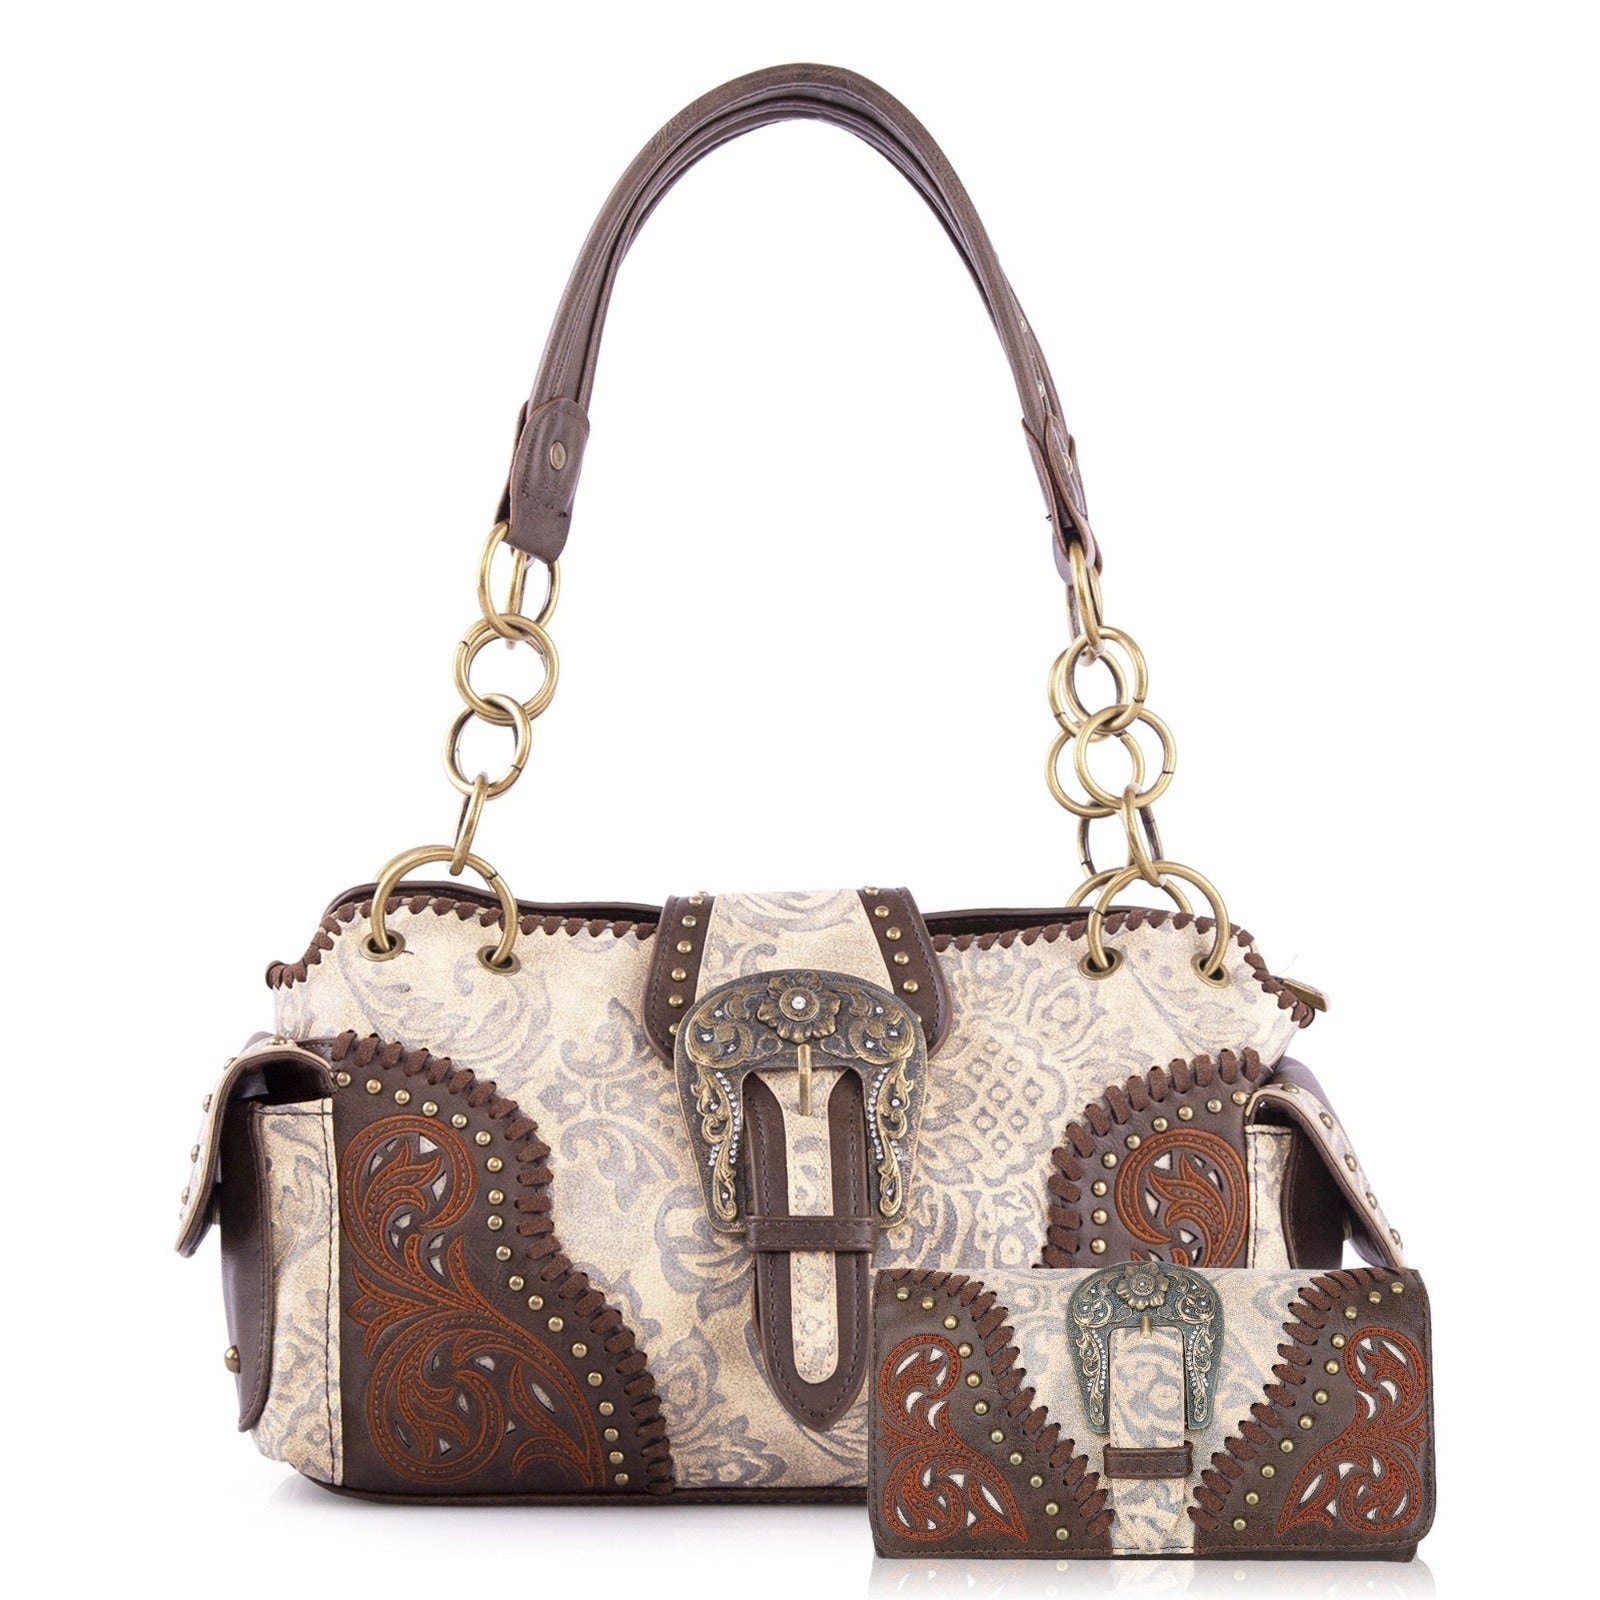 Western Style Rhinestone Concho Buckle Concealed Carry Purse Women Shoulder  Bag | Texas West